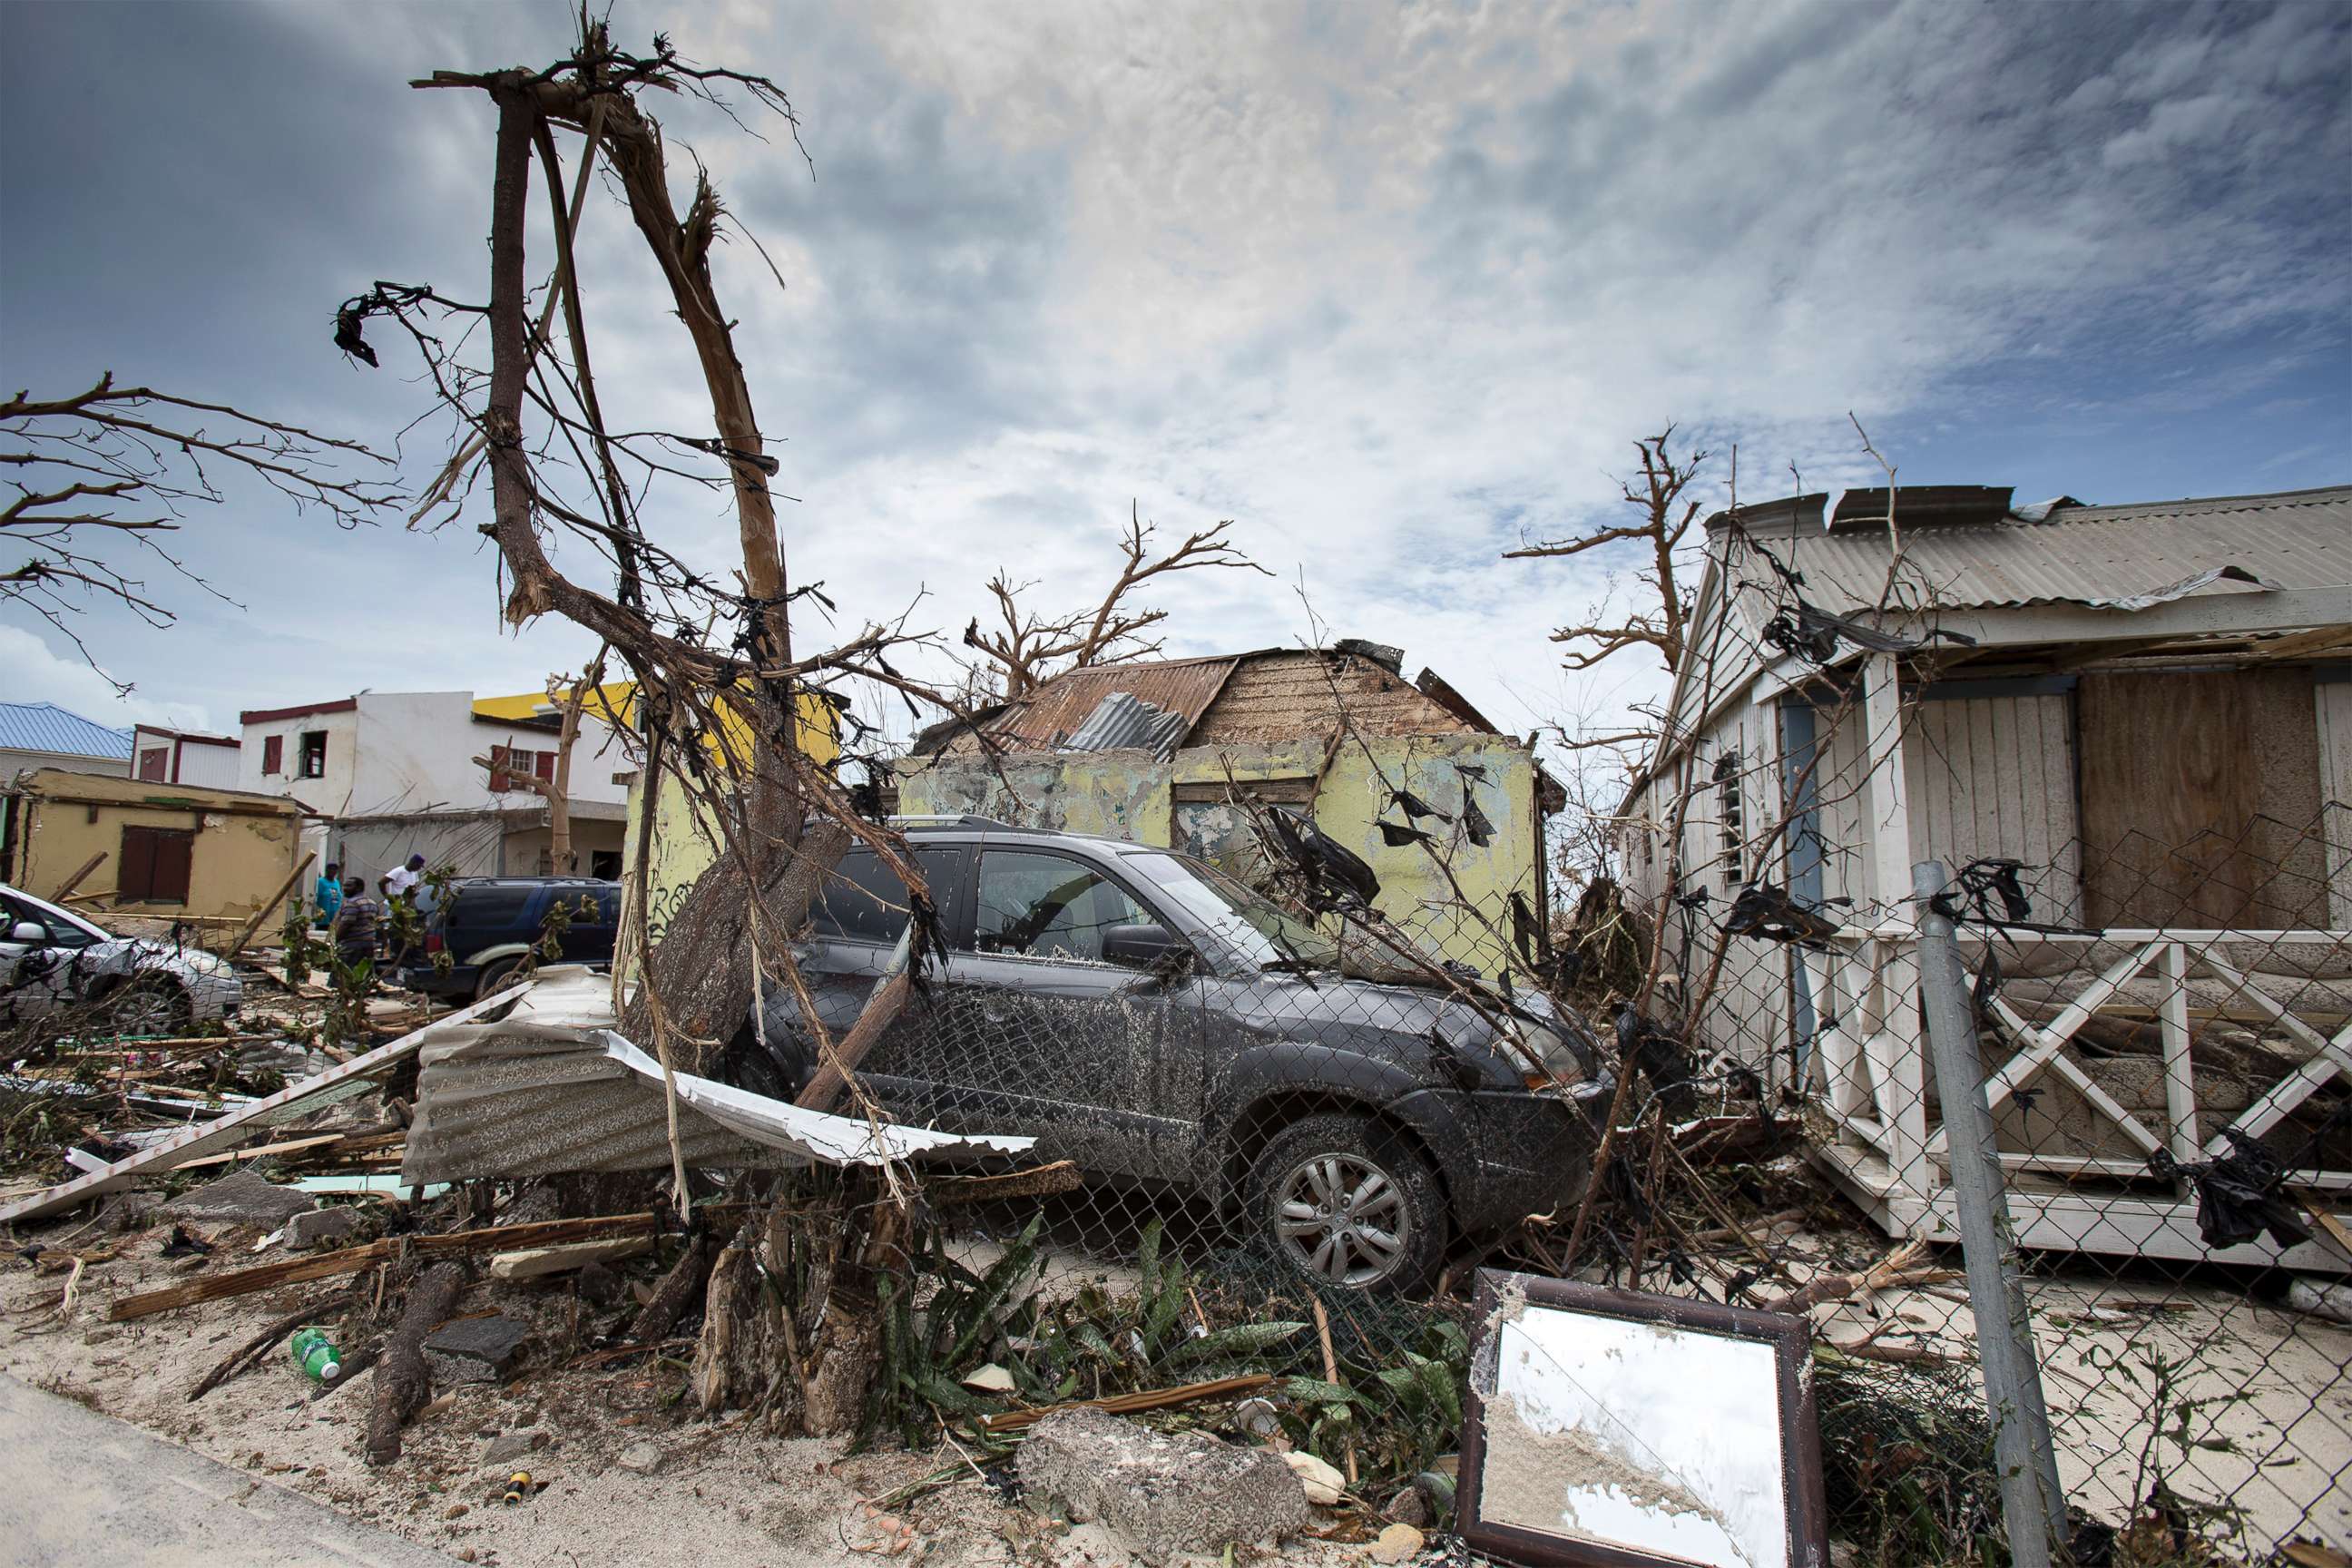 PHOTO: This handout photograph provided courtesy of the Dutch Department of Defense on Sept. 7, 2017, shows houses and cars damaged after the passage of Hurricane Irma on the Dutch Caribbean island of St. Maarten.